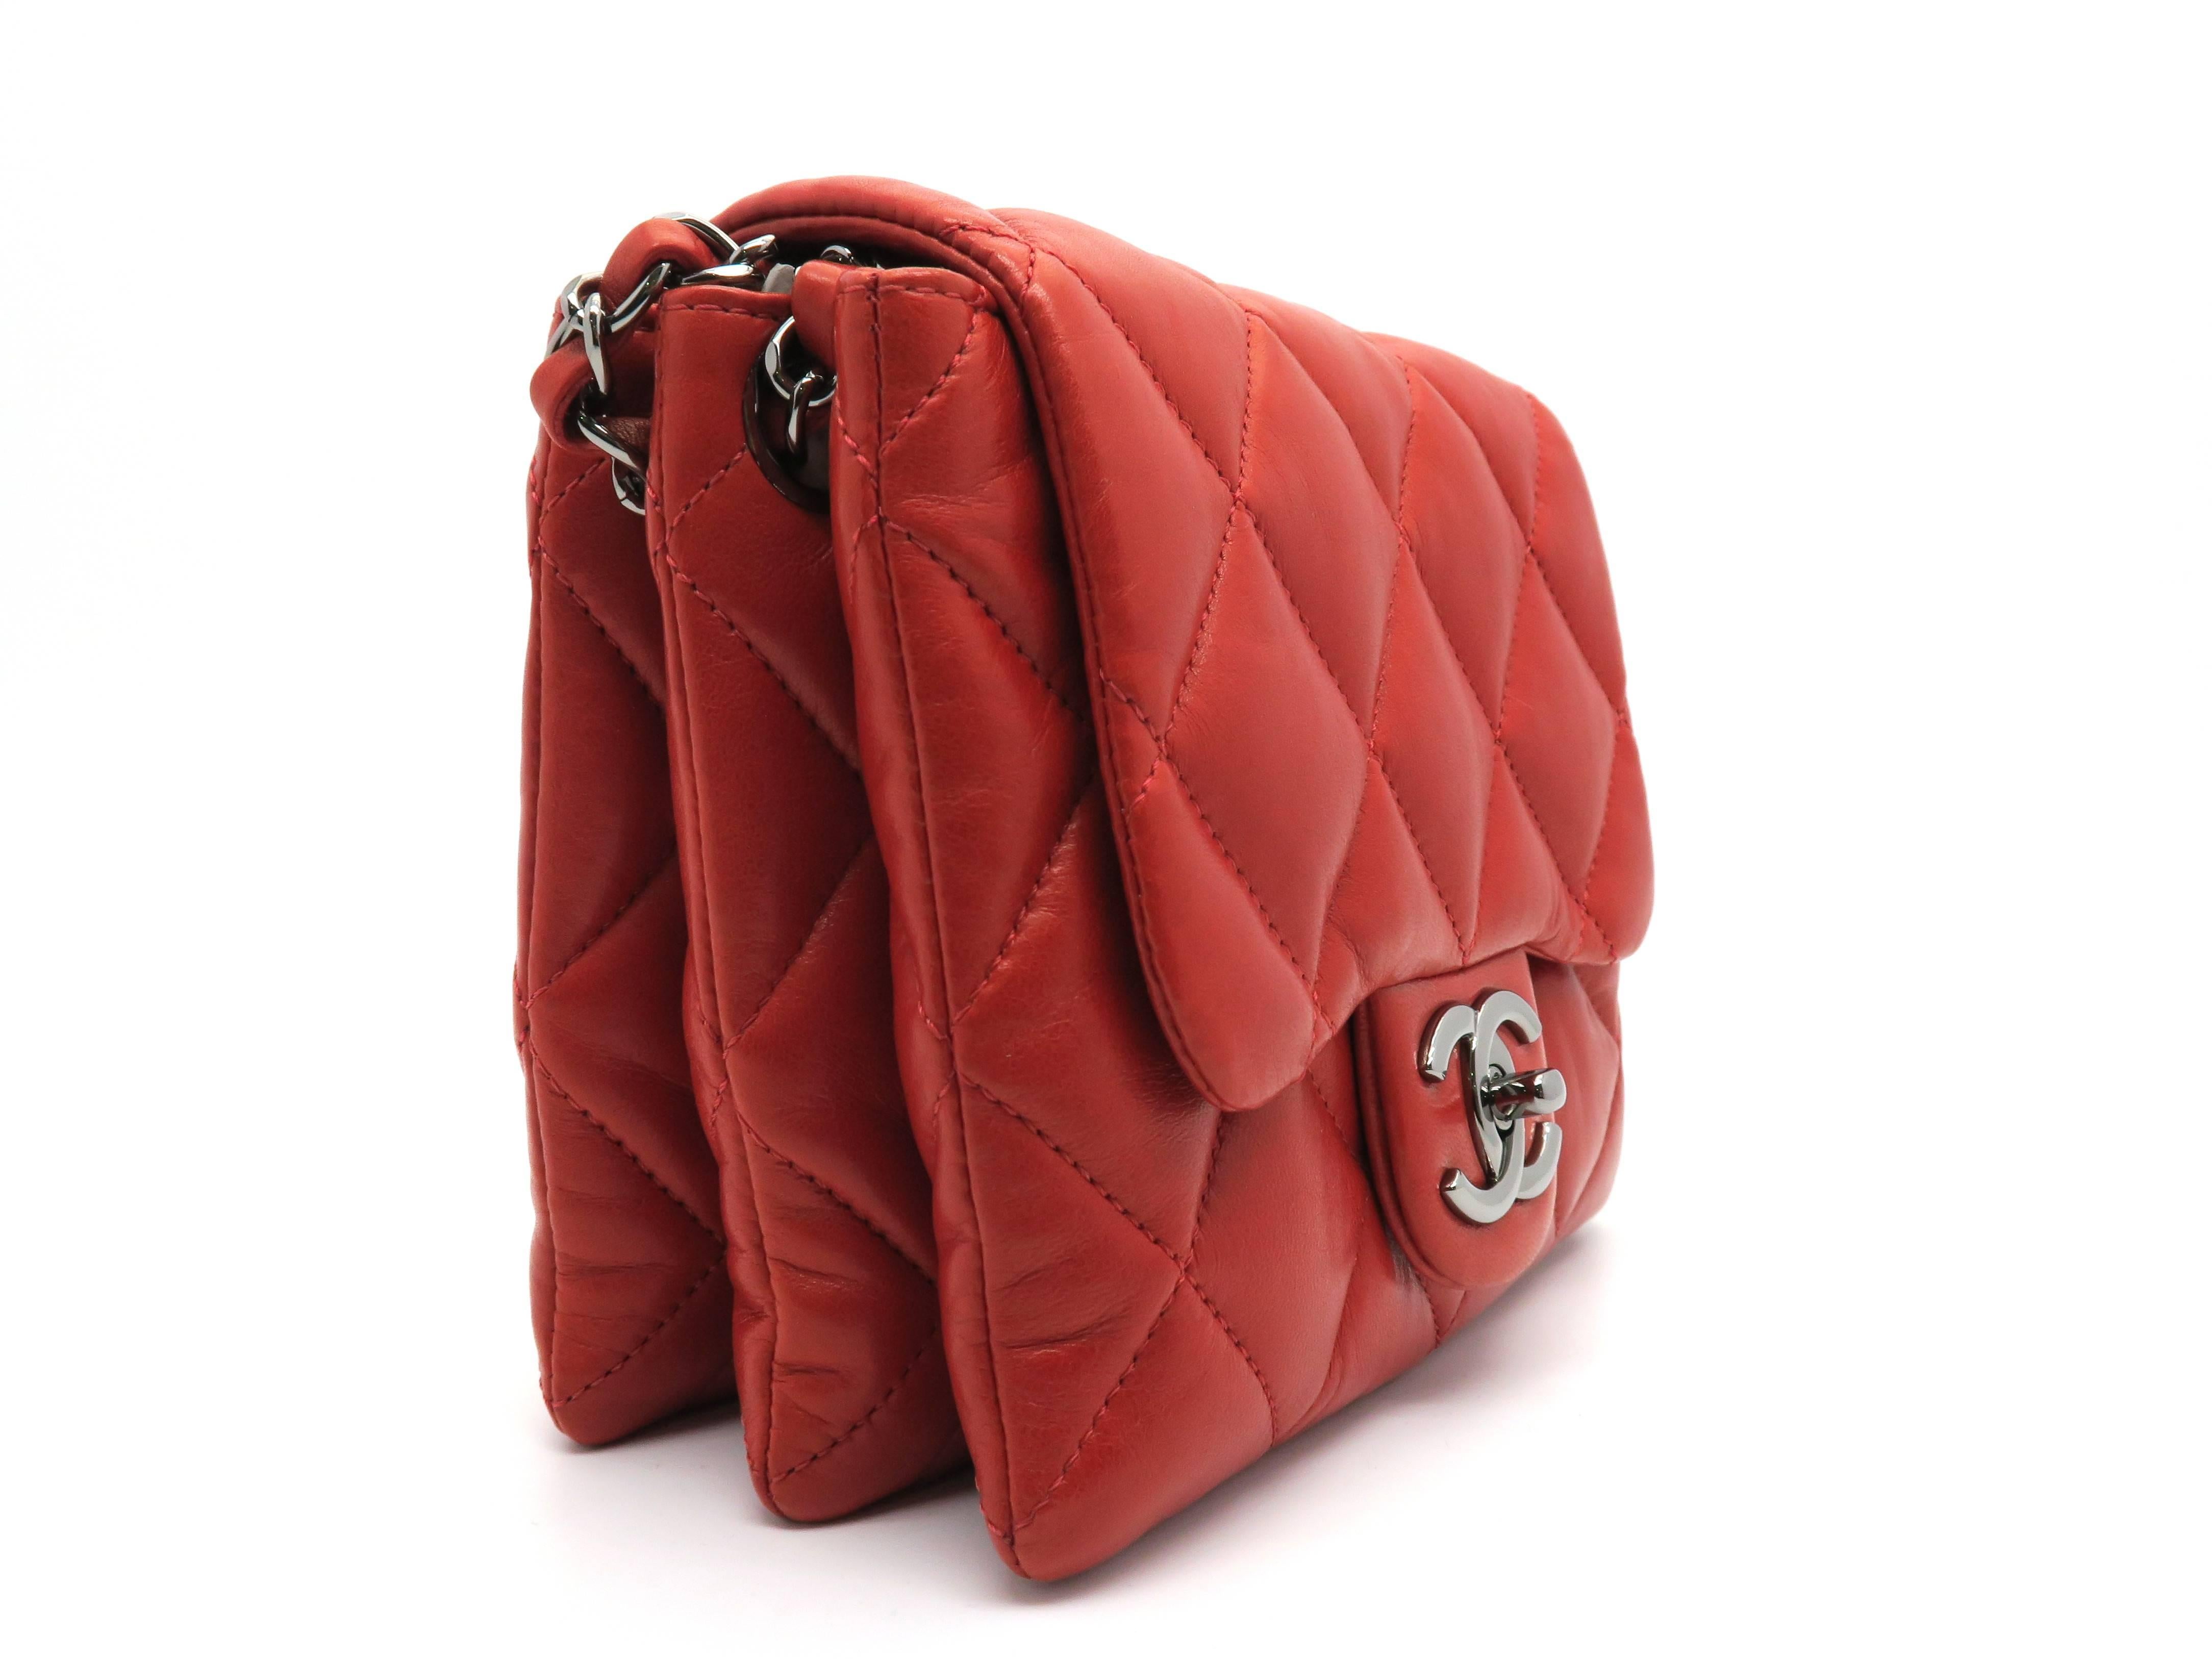 Color: Red 

Material: Quilted Calfskin Leather

Condition: Rank A 
Overall: Good, few minor defects
Surface: Minor Scratches
Corners: Minor Scratches & Stains
Edges: Good
Handles/Straps: Good
Hardware: Minor Scratches

Serial Number #13898298
